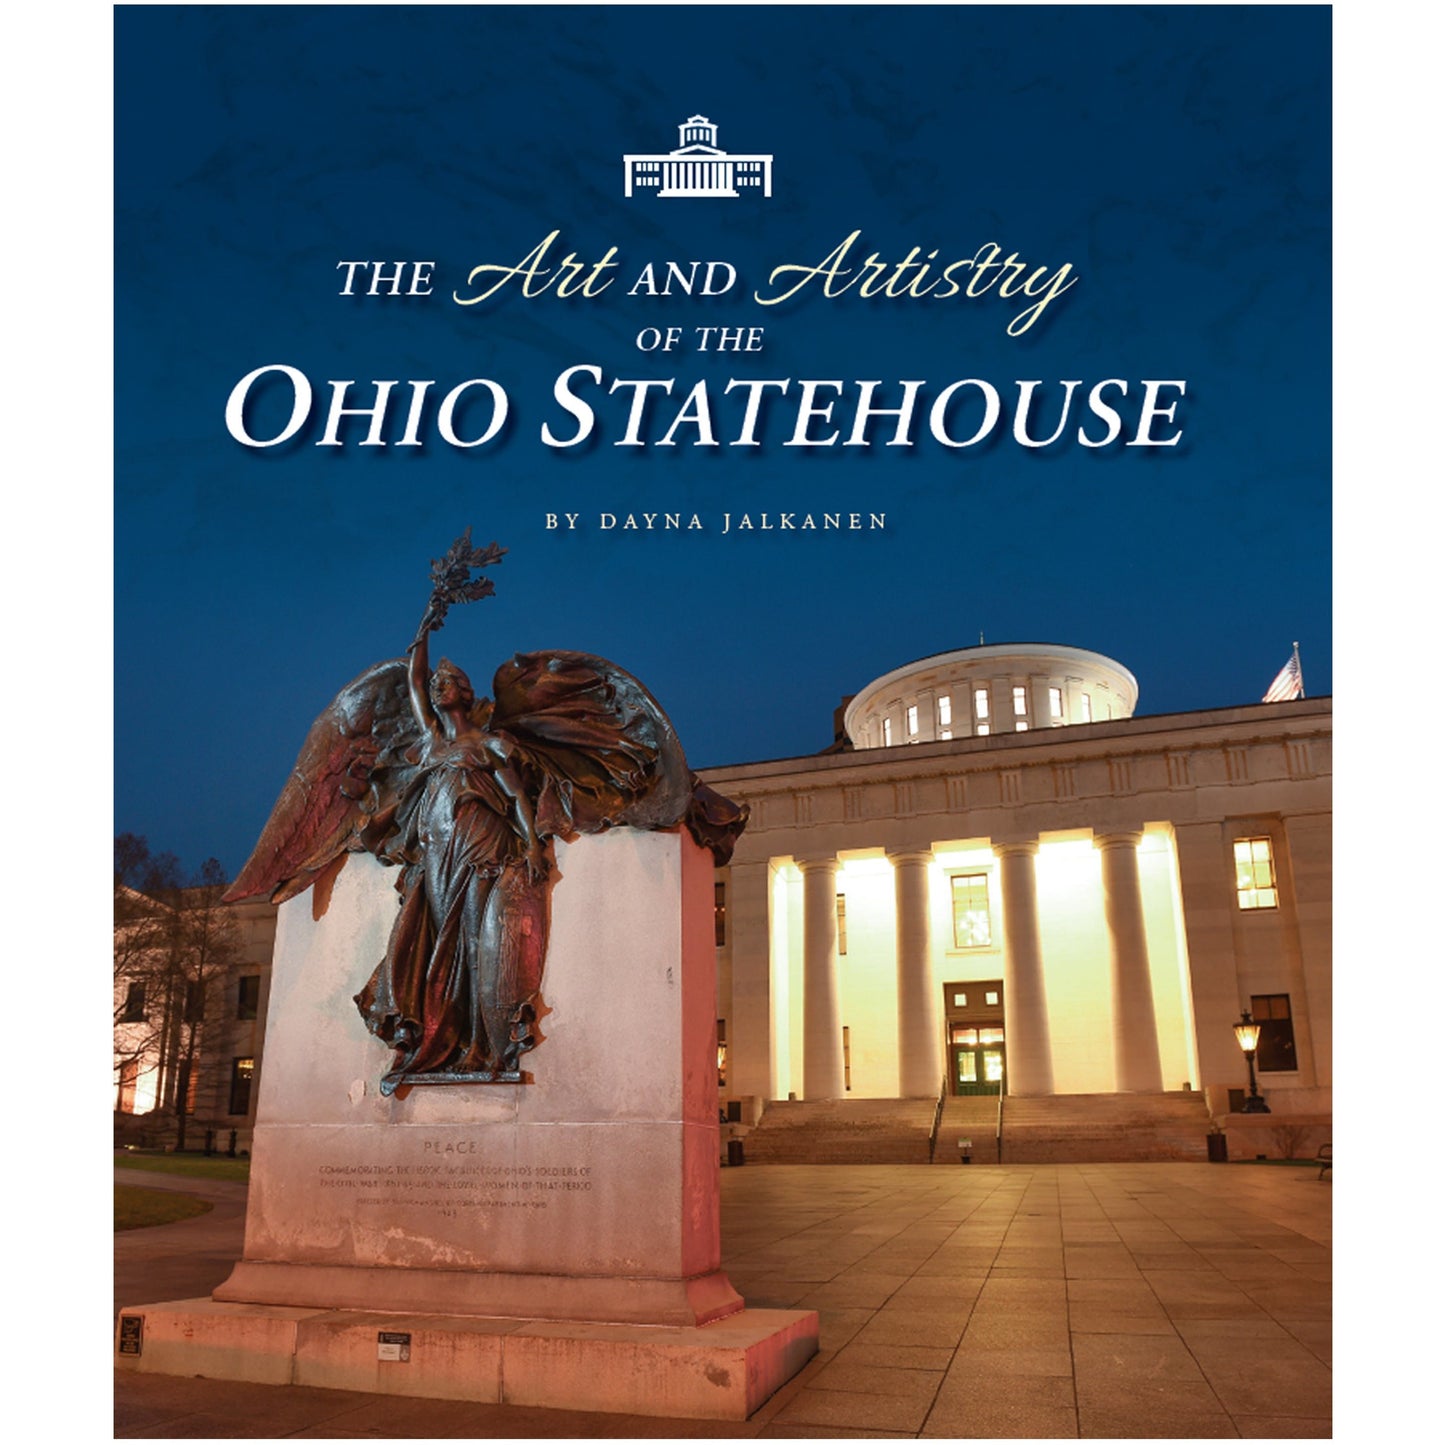 The Art And Artistry of the Ohio Statehouse by Dayna Jalkanen